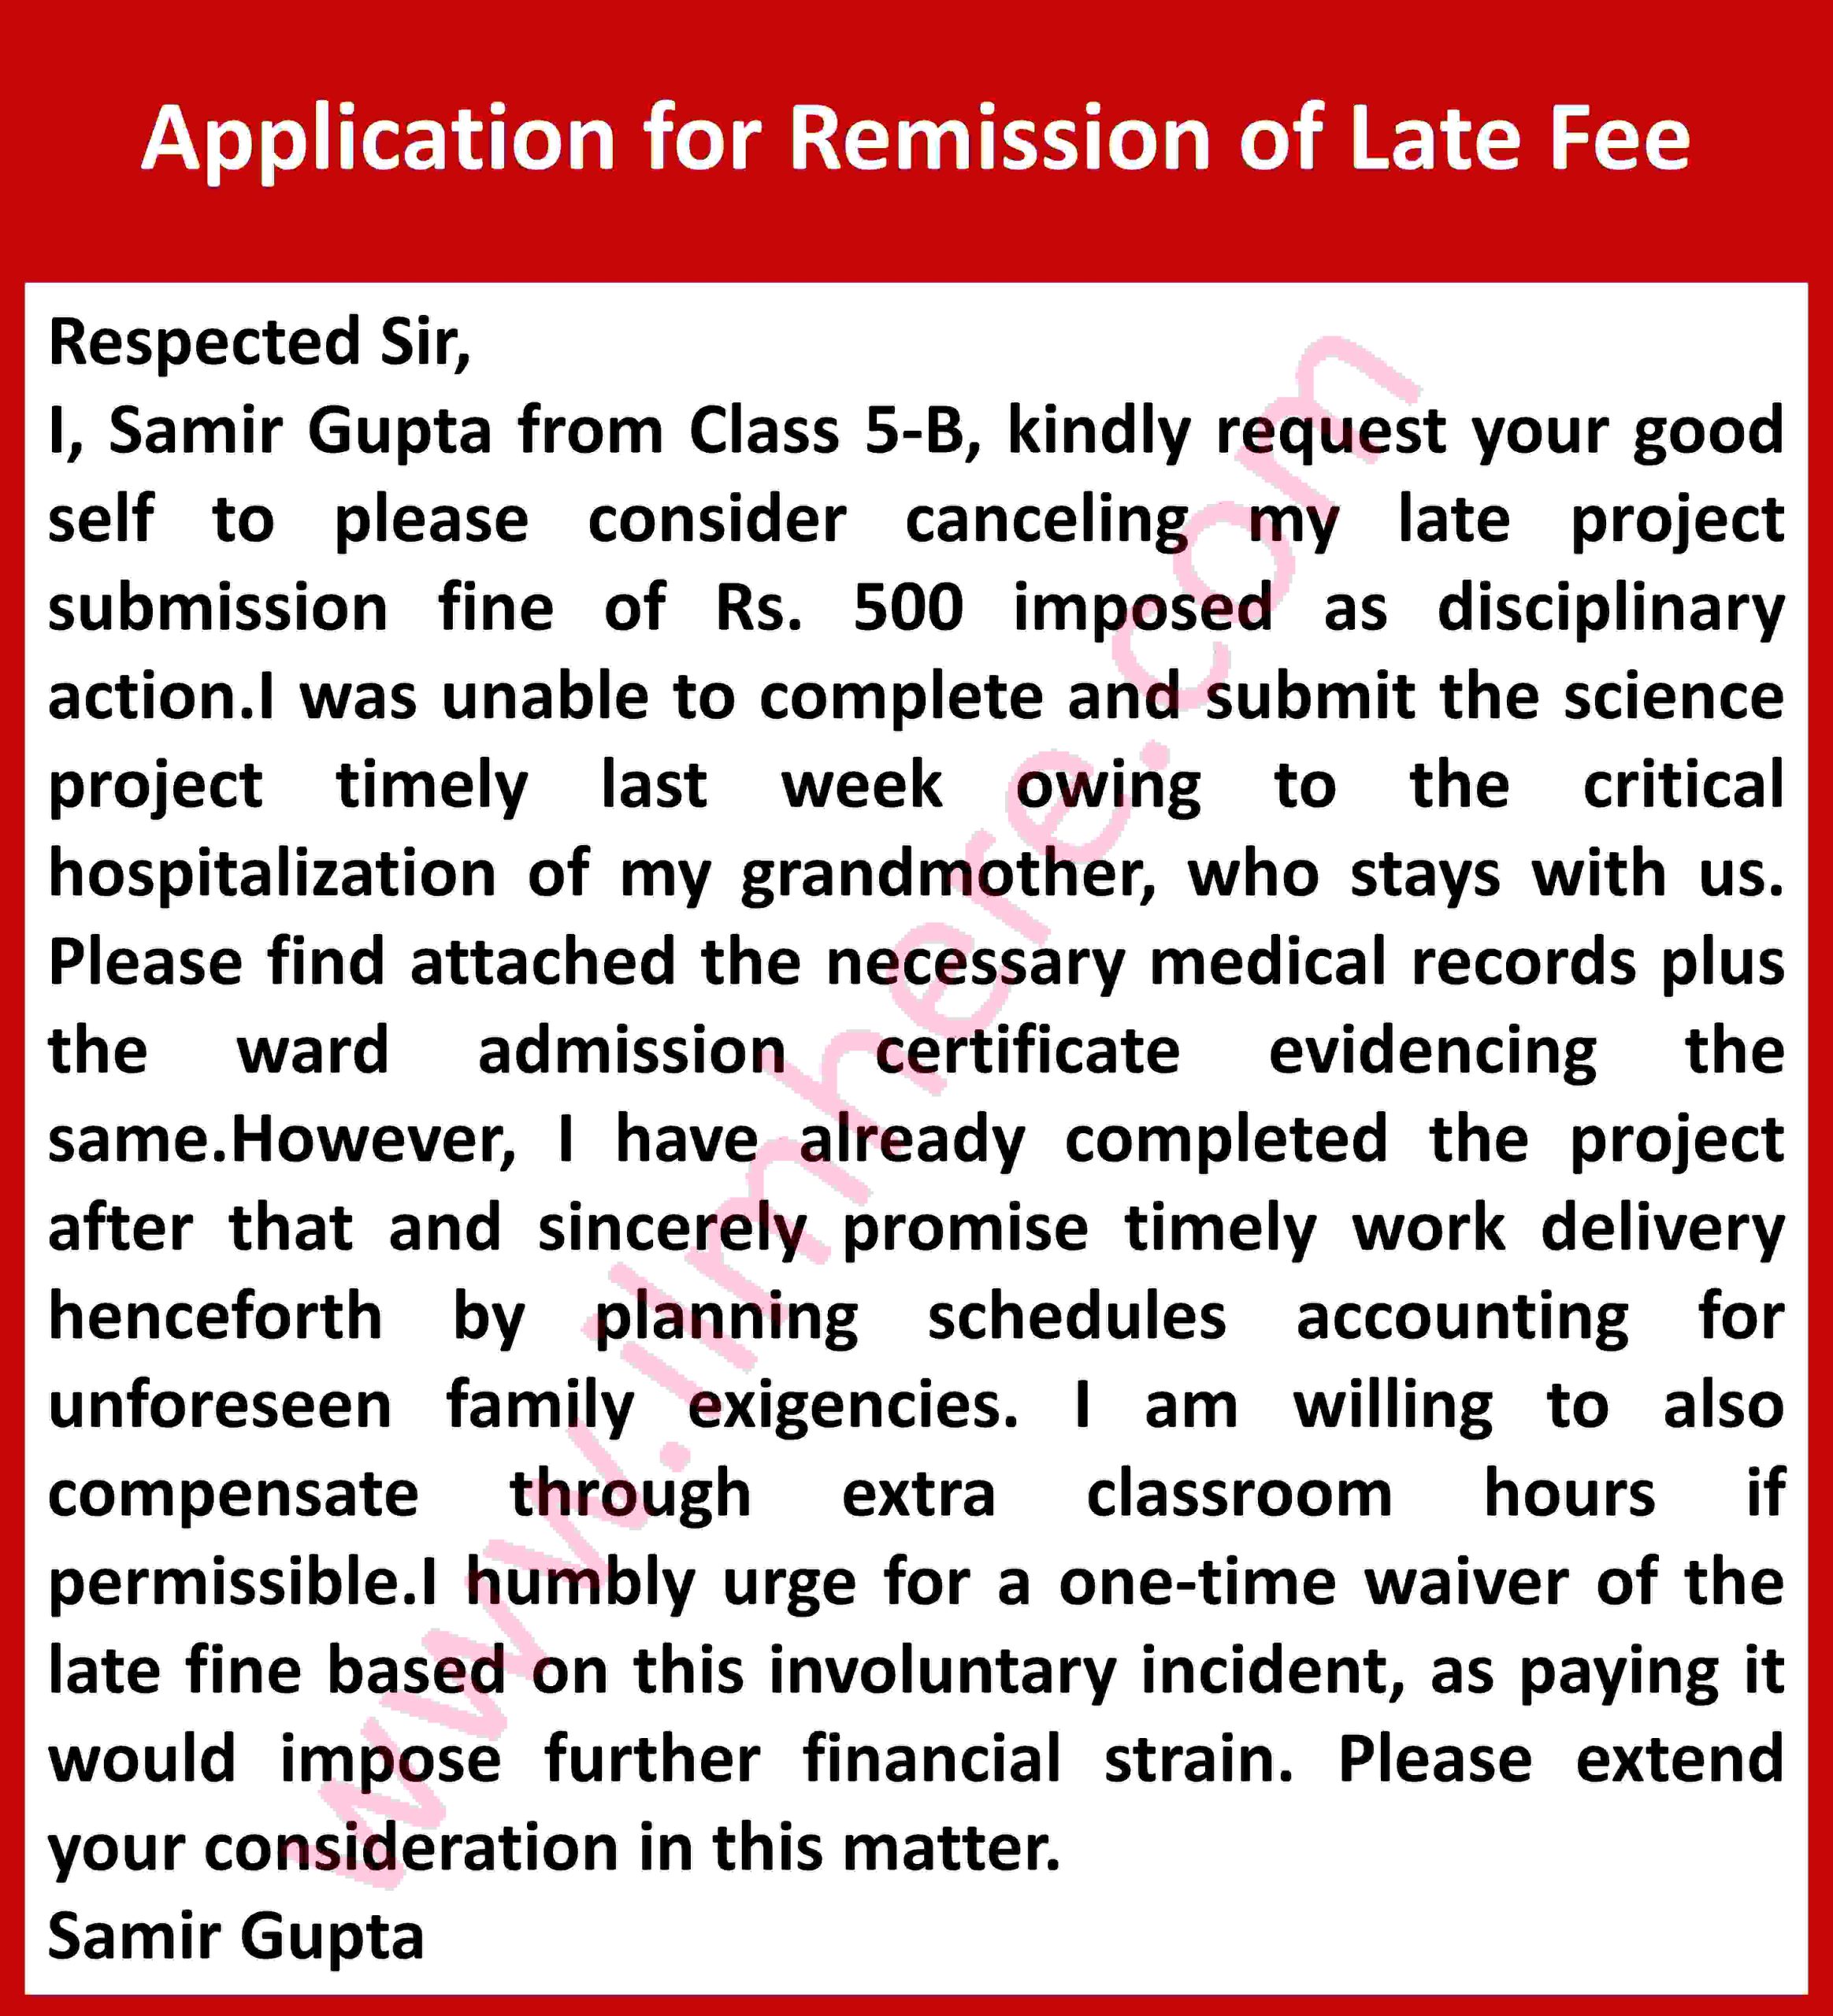 Application for Remission of Late Fee